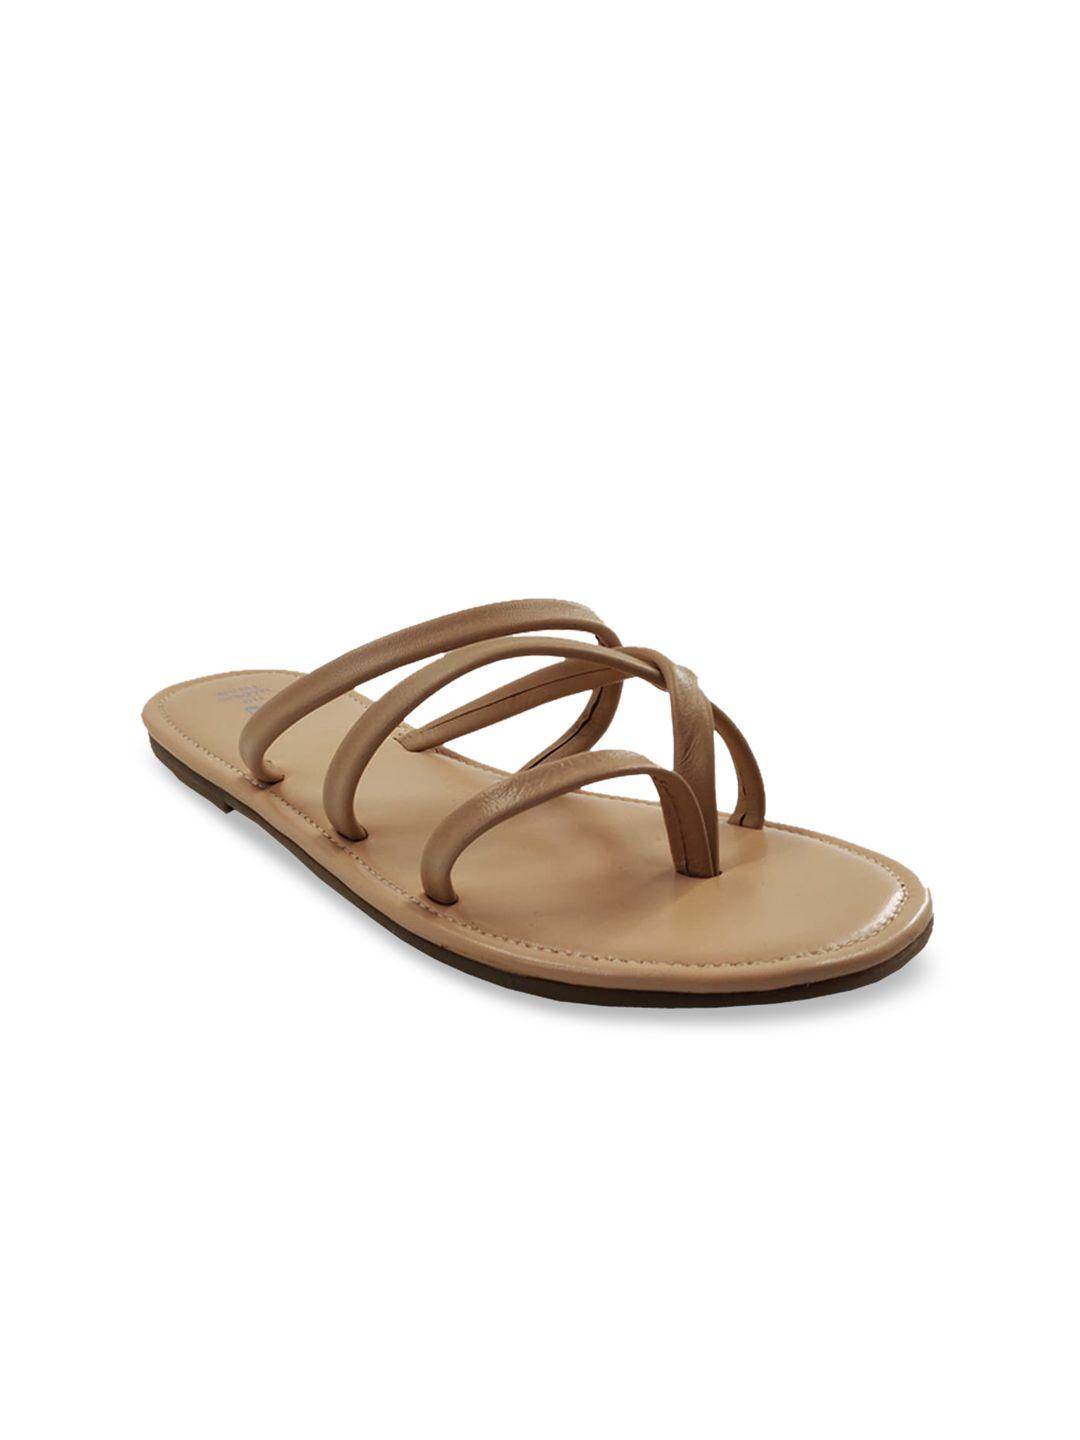 the madras trunk women beige solid leather one toe flats